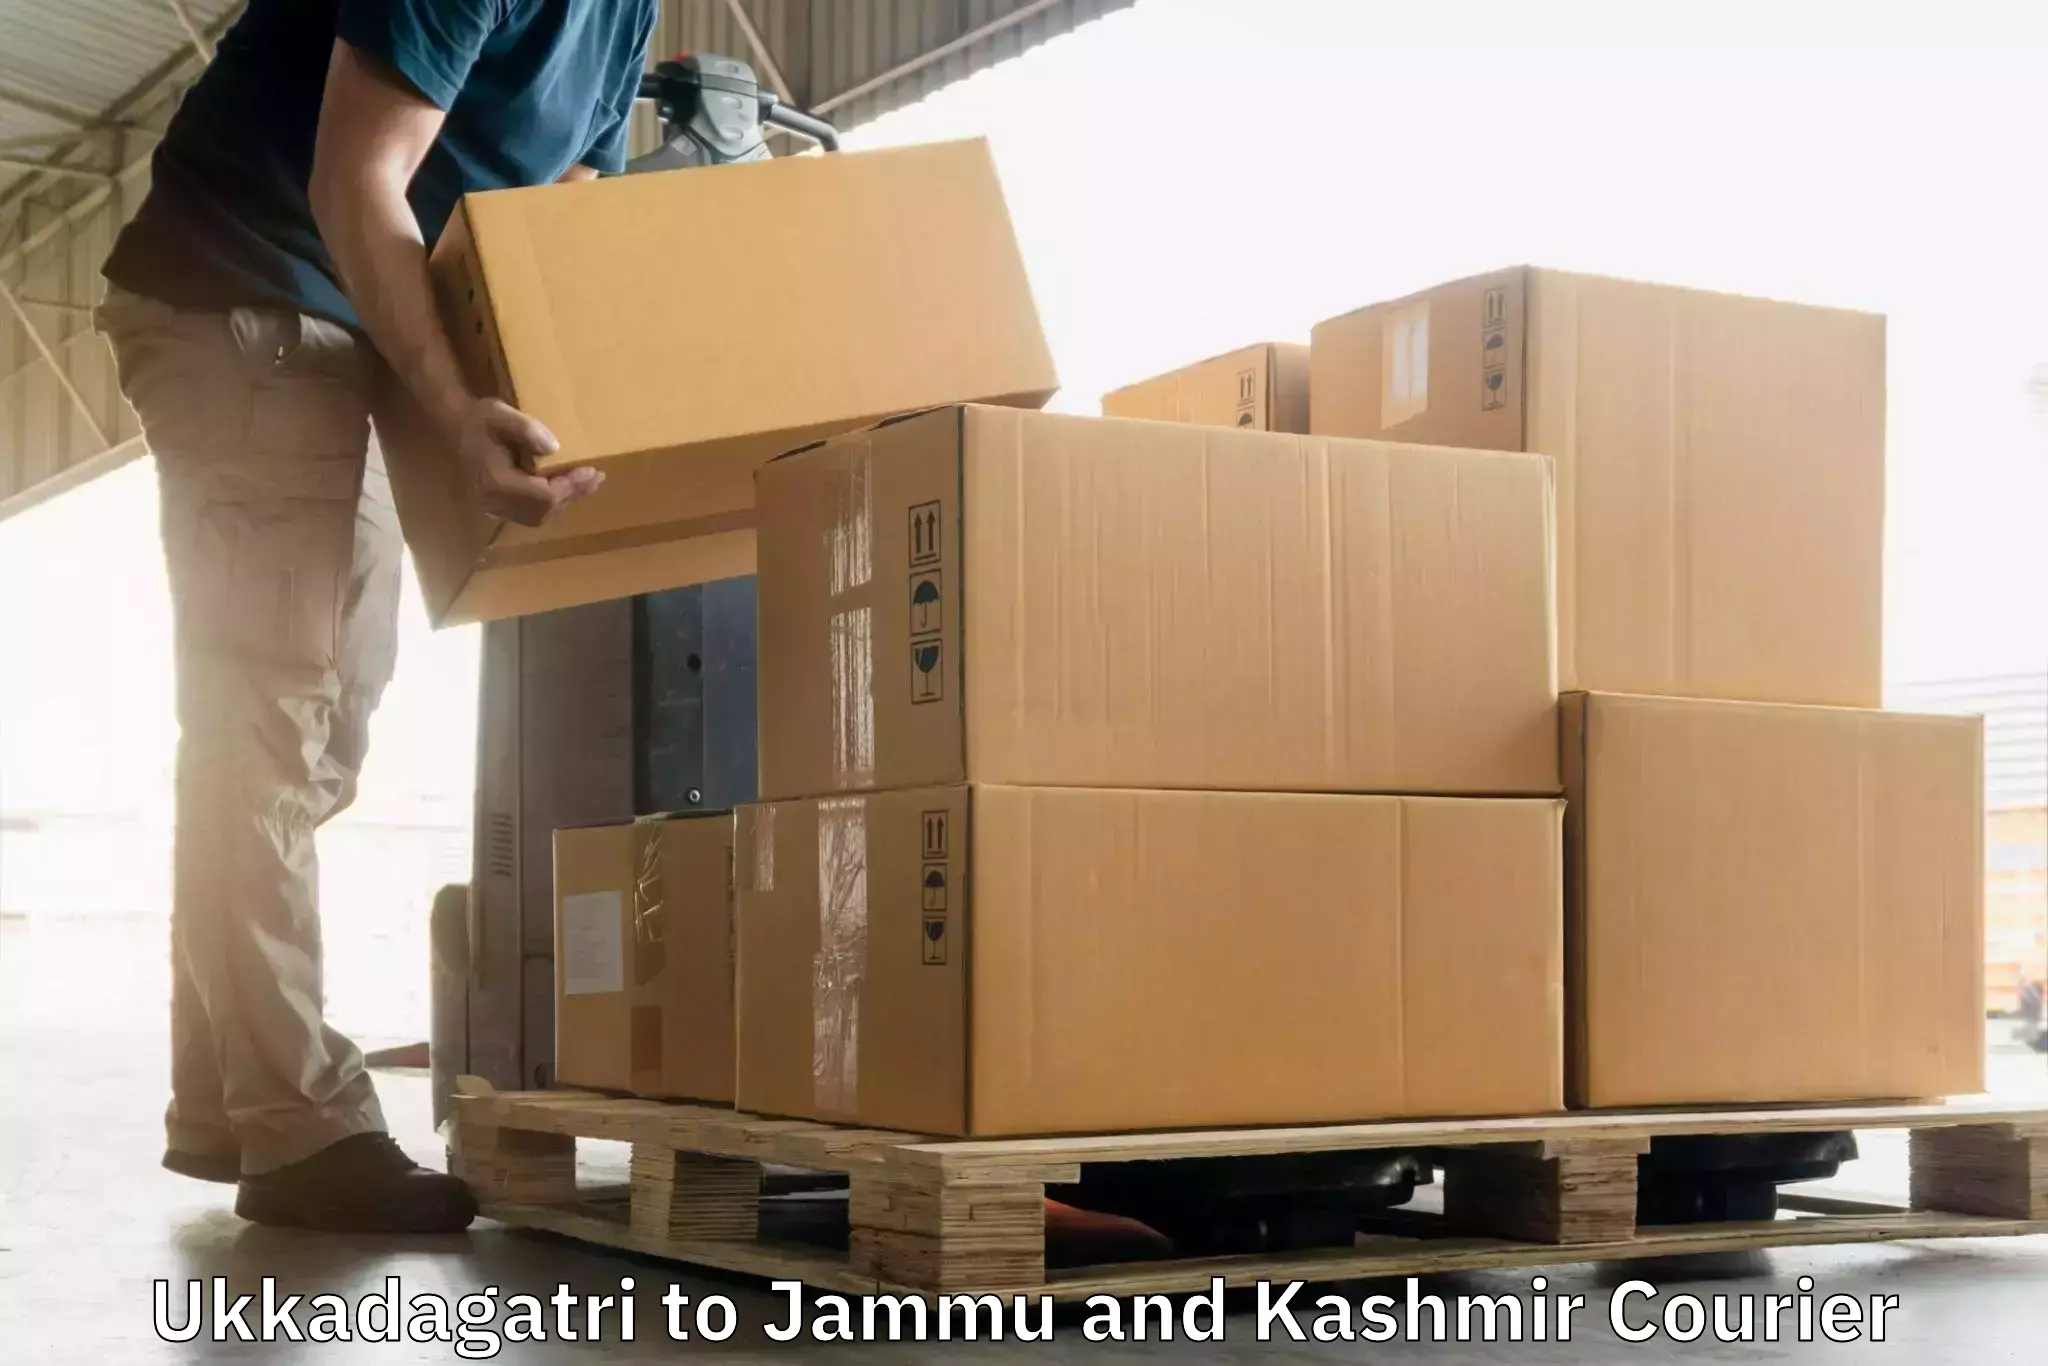 Package delivery network Ukkadagatri to Pulwama